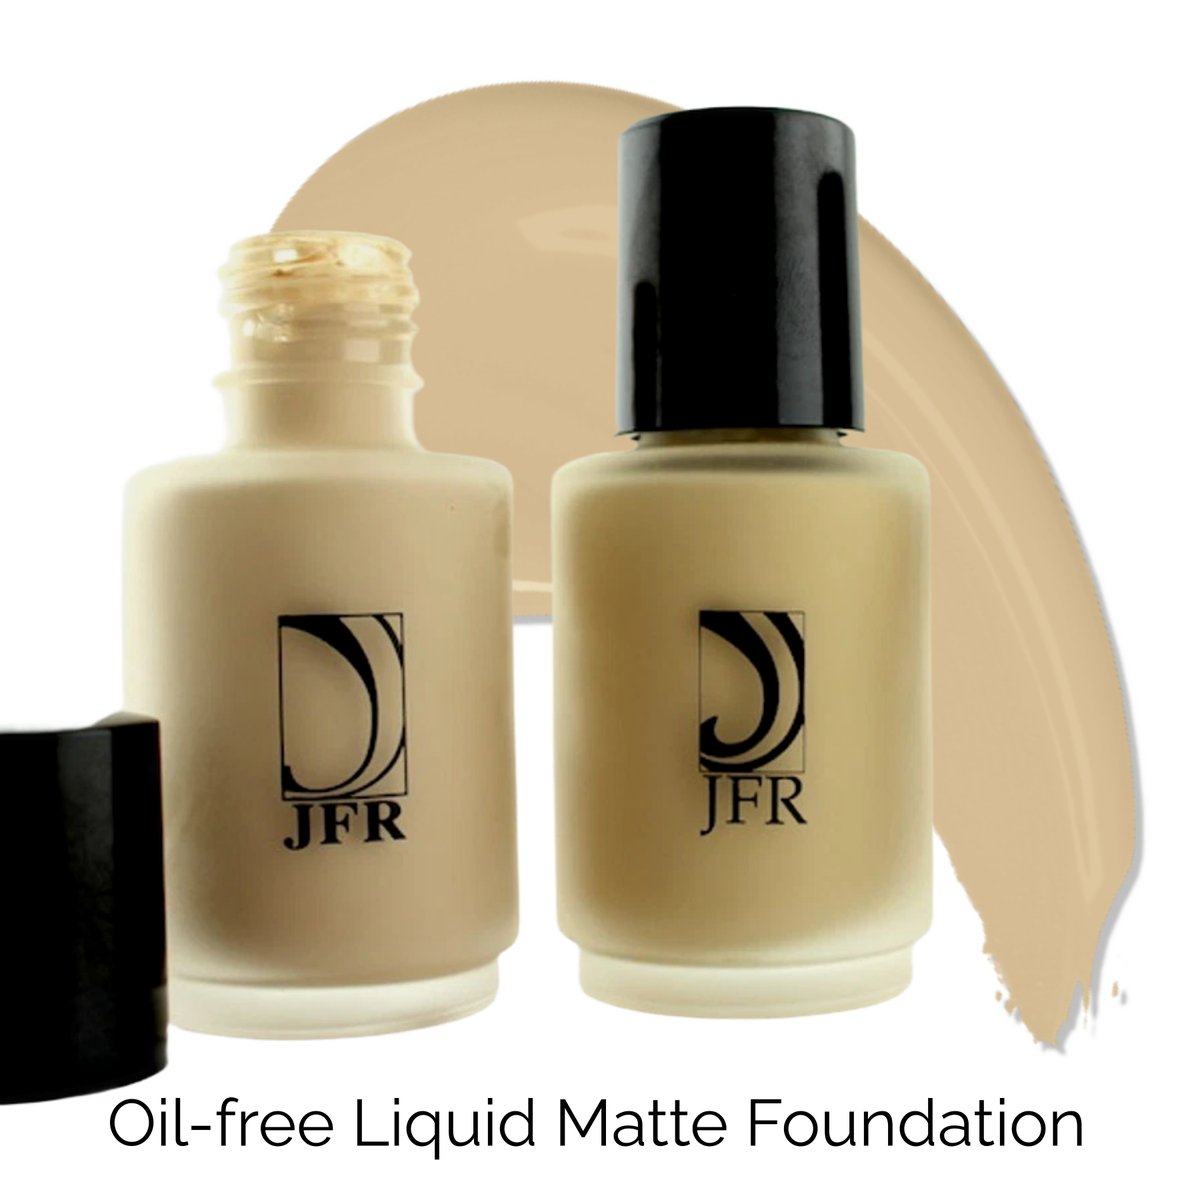 5 Star Rated Oil Free Liquid Matte Foundation. Bid farewell to multiple products because this gem does it all! Just pure JFR perfection.

Get ready to slay, gorgeous! justforredheads.com/oil-free-liqui…

#redheadapproved #redhair #beautyproducts #jfr #justforredheadsofficial #ginger